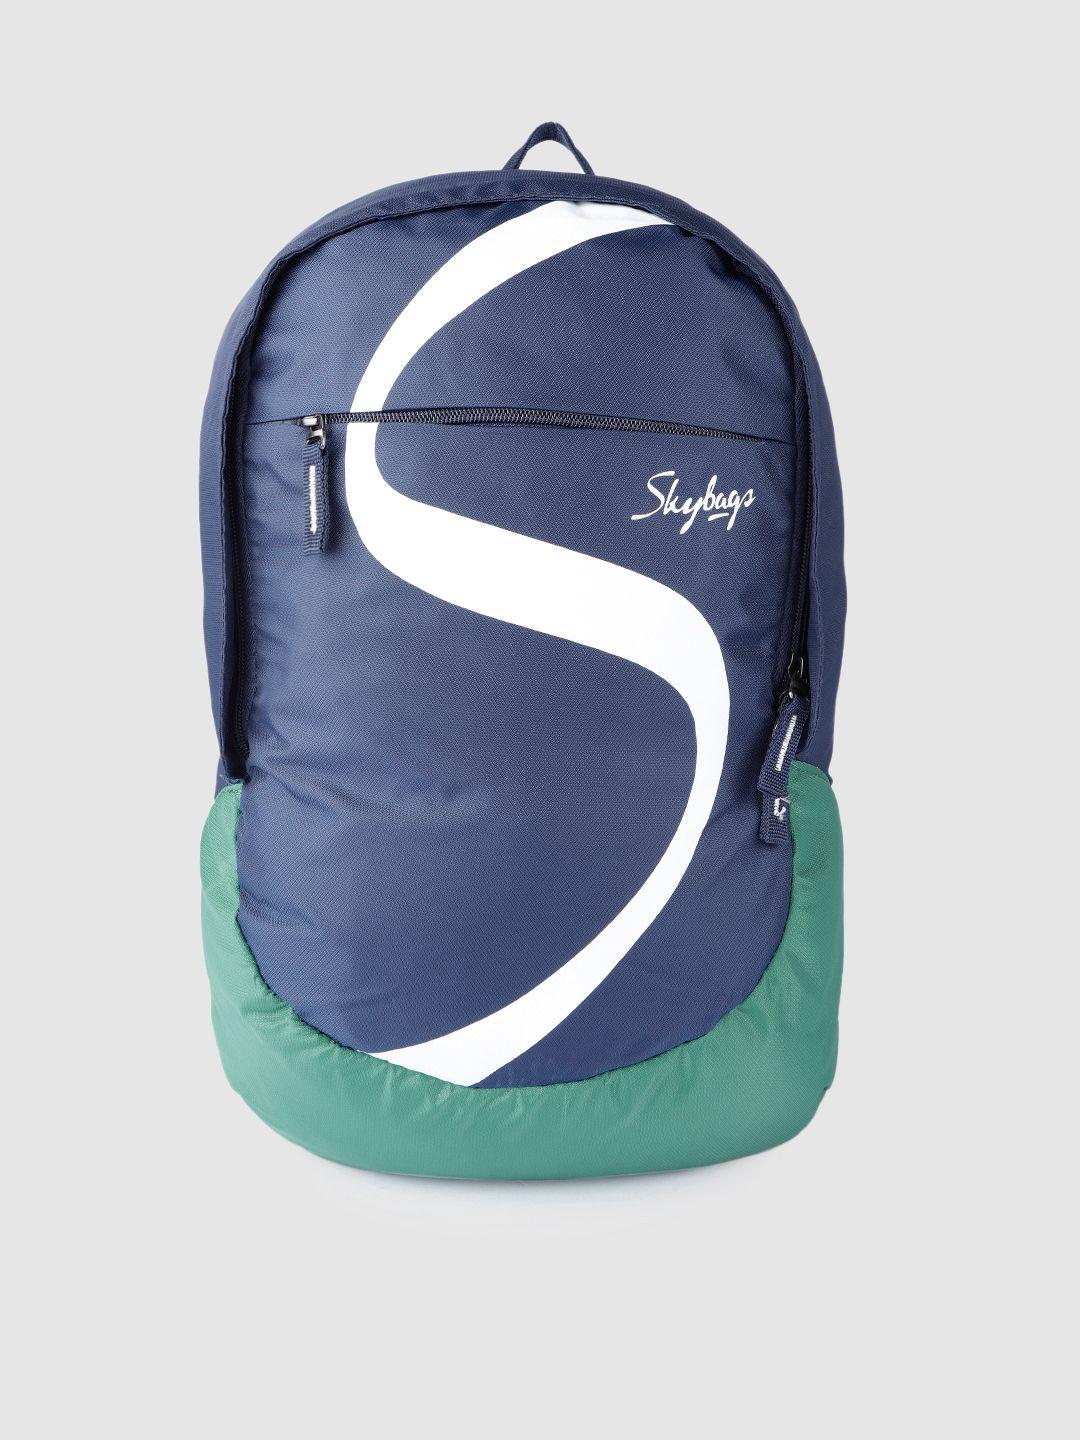 skybags unisex blue & sea green colourblocked backpack